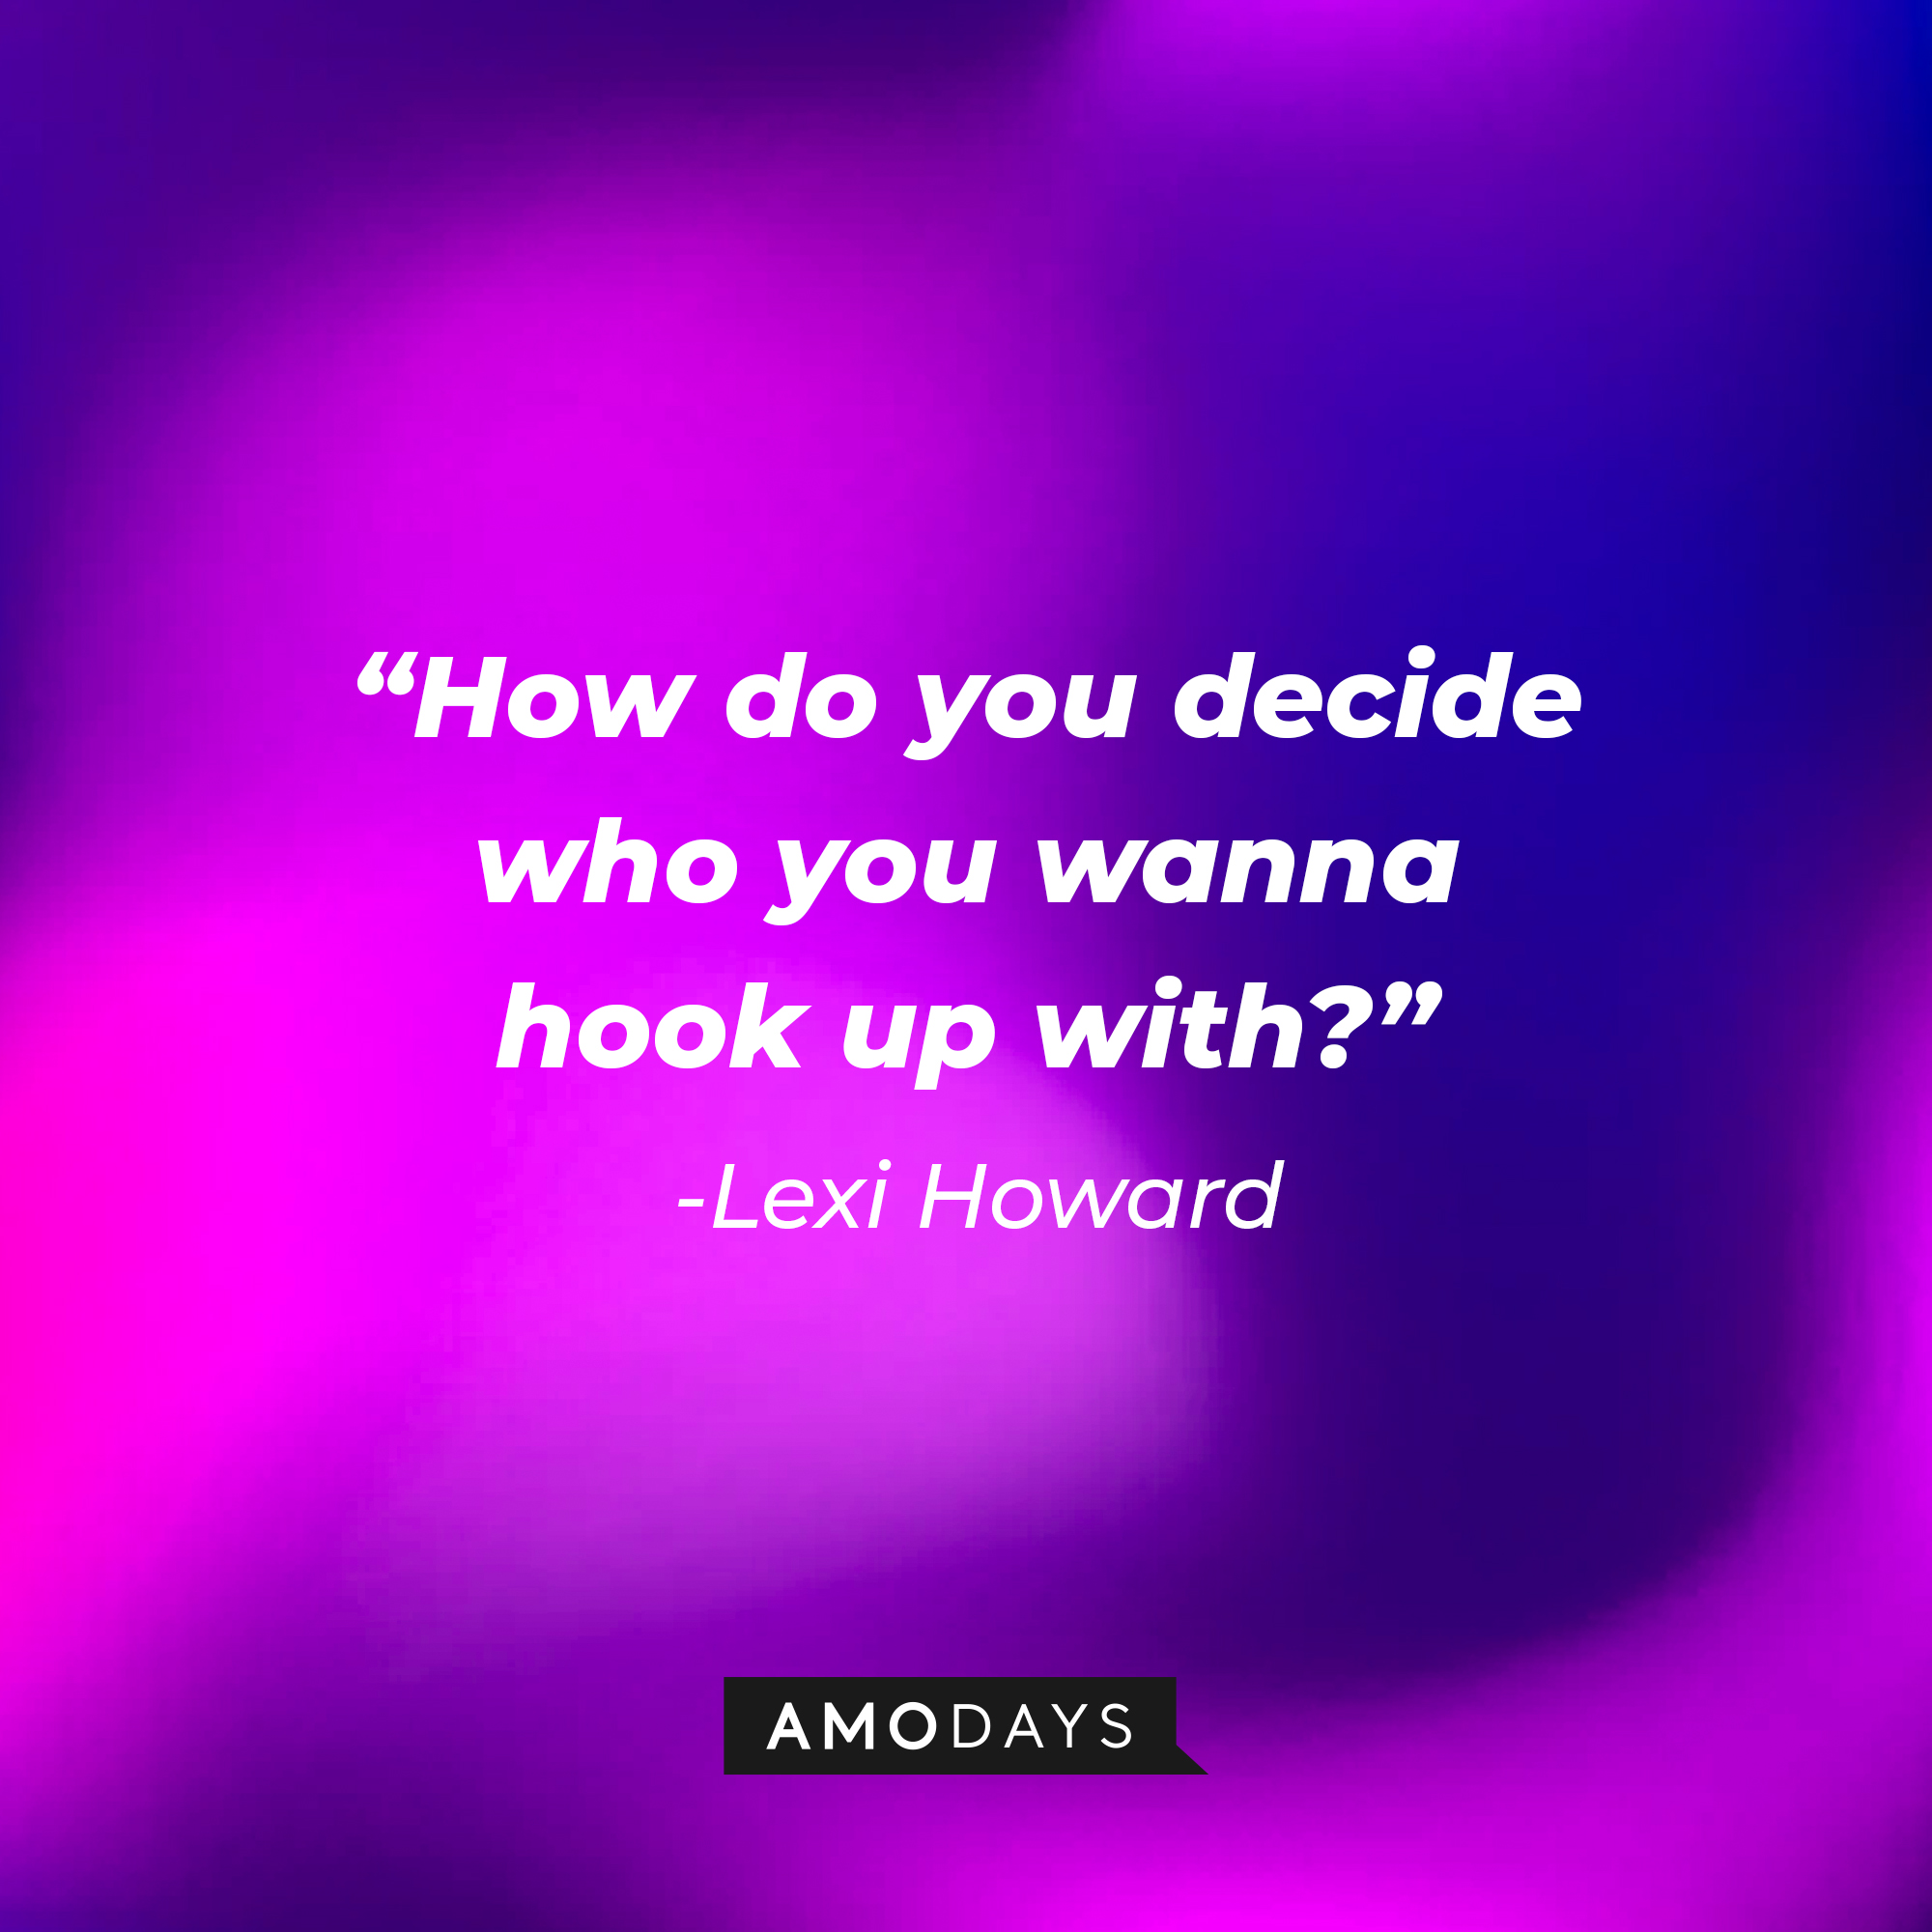 Lexi Howard’s quote: “How do you decide who you wanna hook up with?”| Source: AmoDays